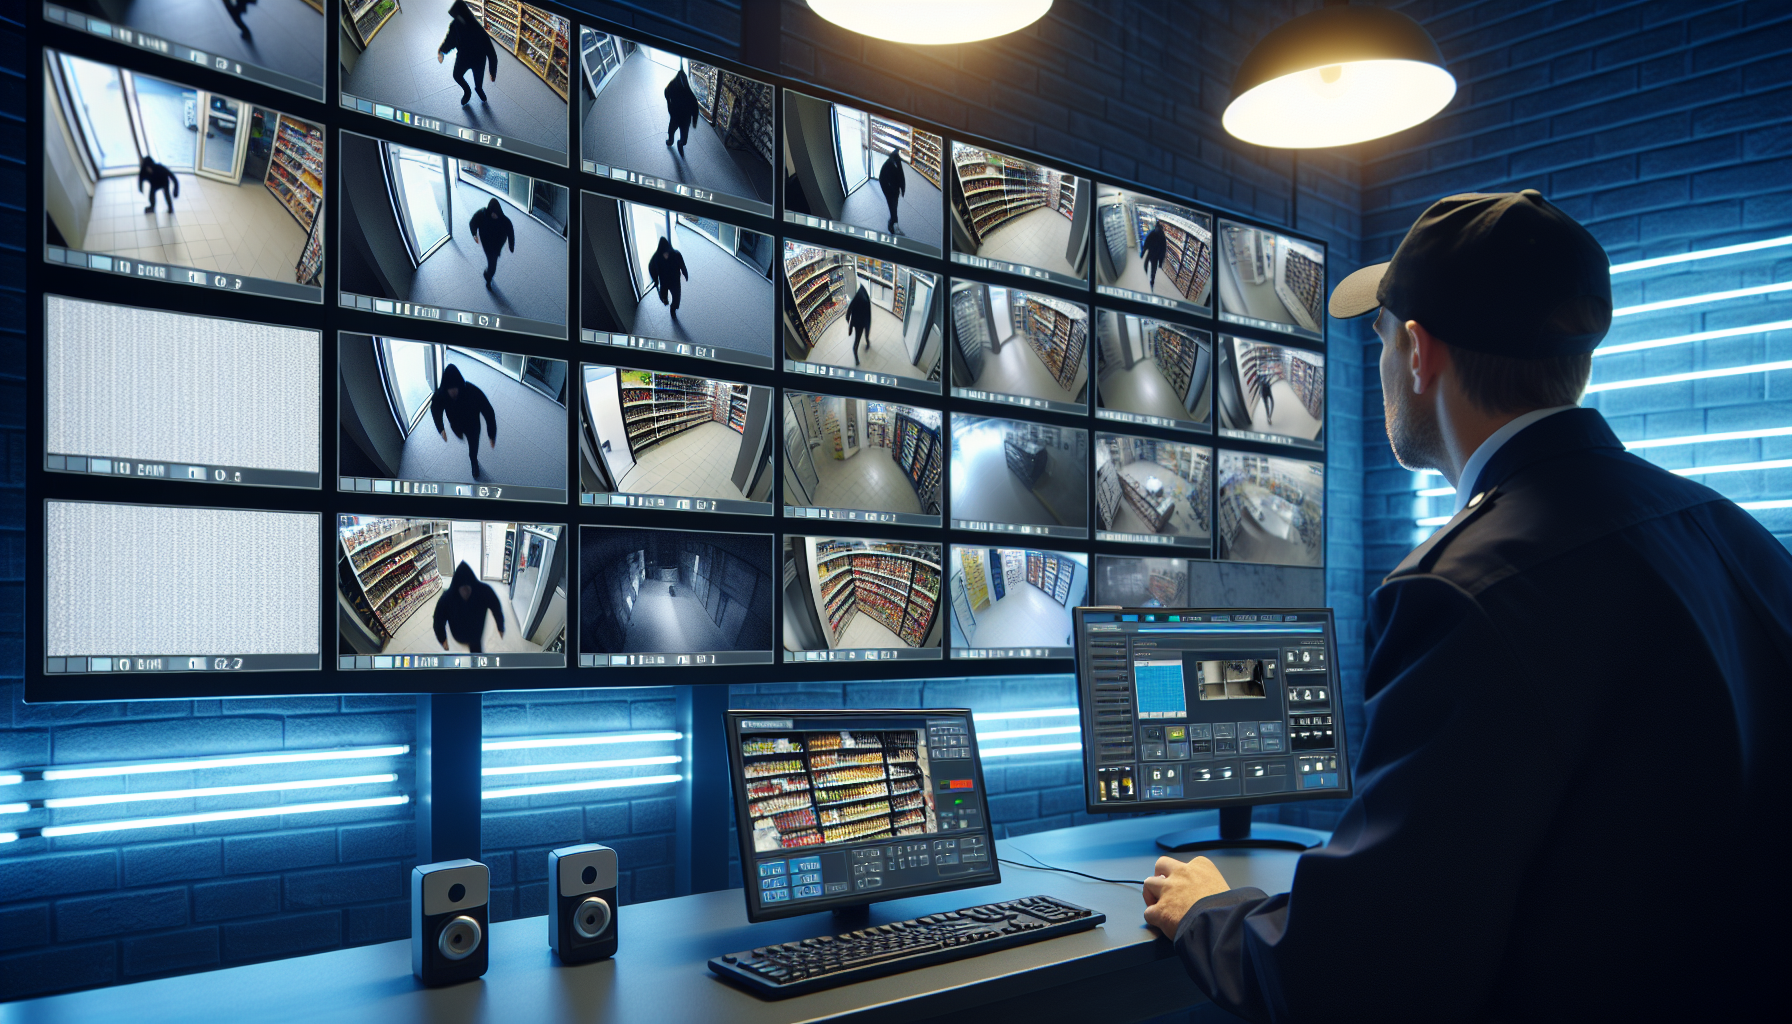 Successful theft prevention through remote video monitoring